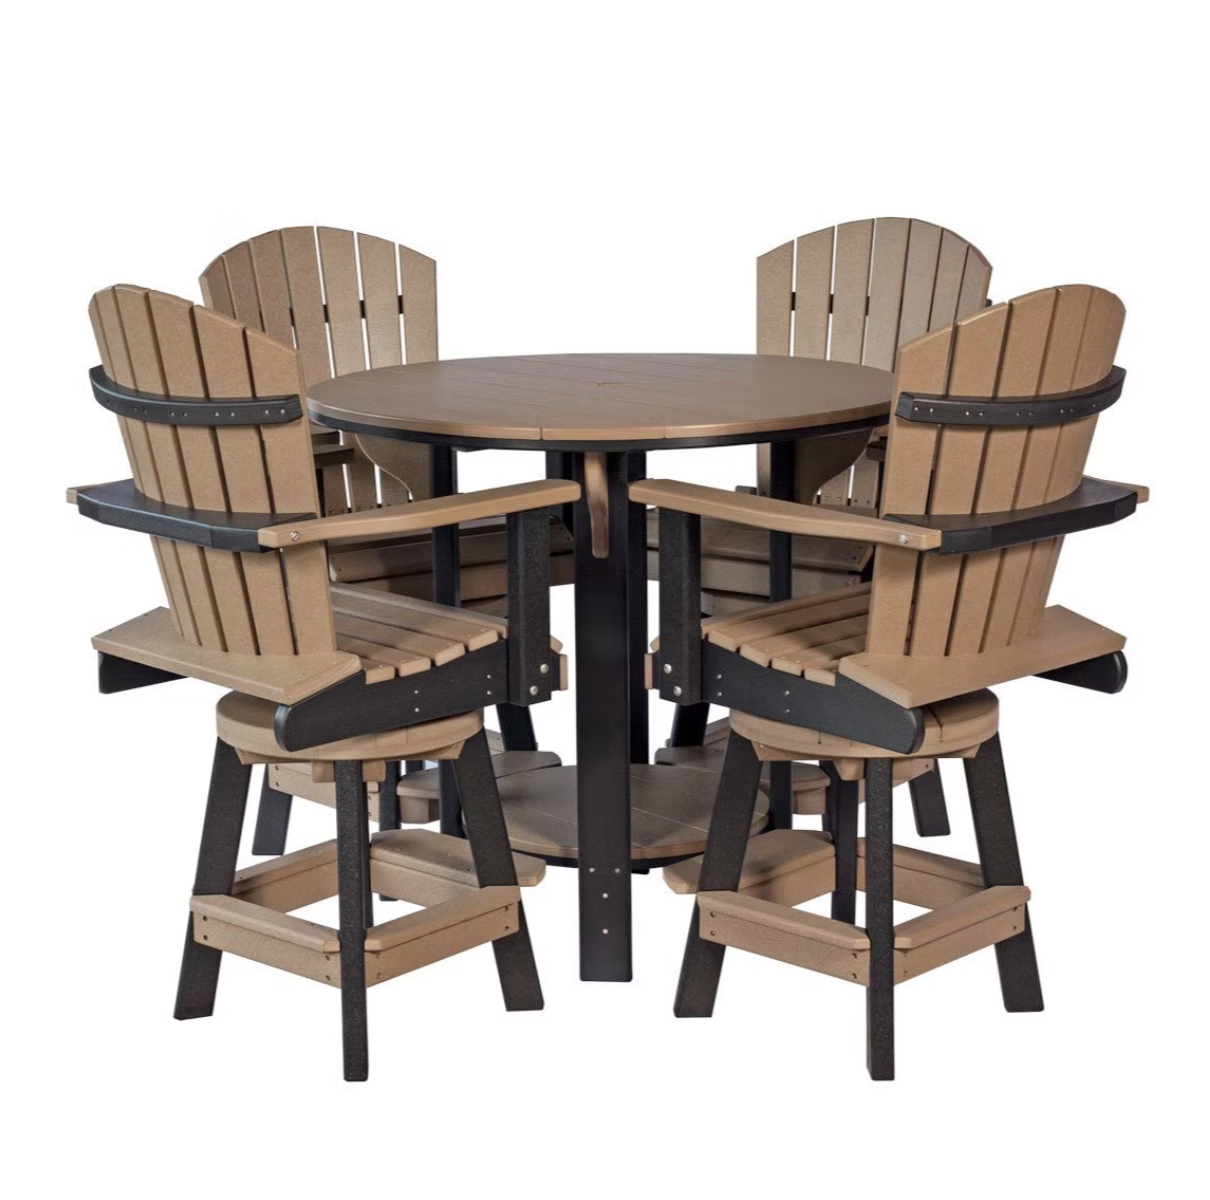 Leisure Lawns Amish Recycled Plastic Balcony 48" Table & Fan-Back 5 Piece Swivel Chair Set (BAR HEIGHT) - LEAD TIME TO SHIP 6 WEEKS OR LESS